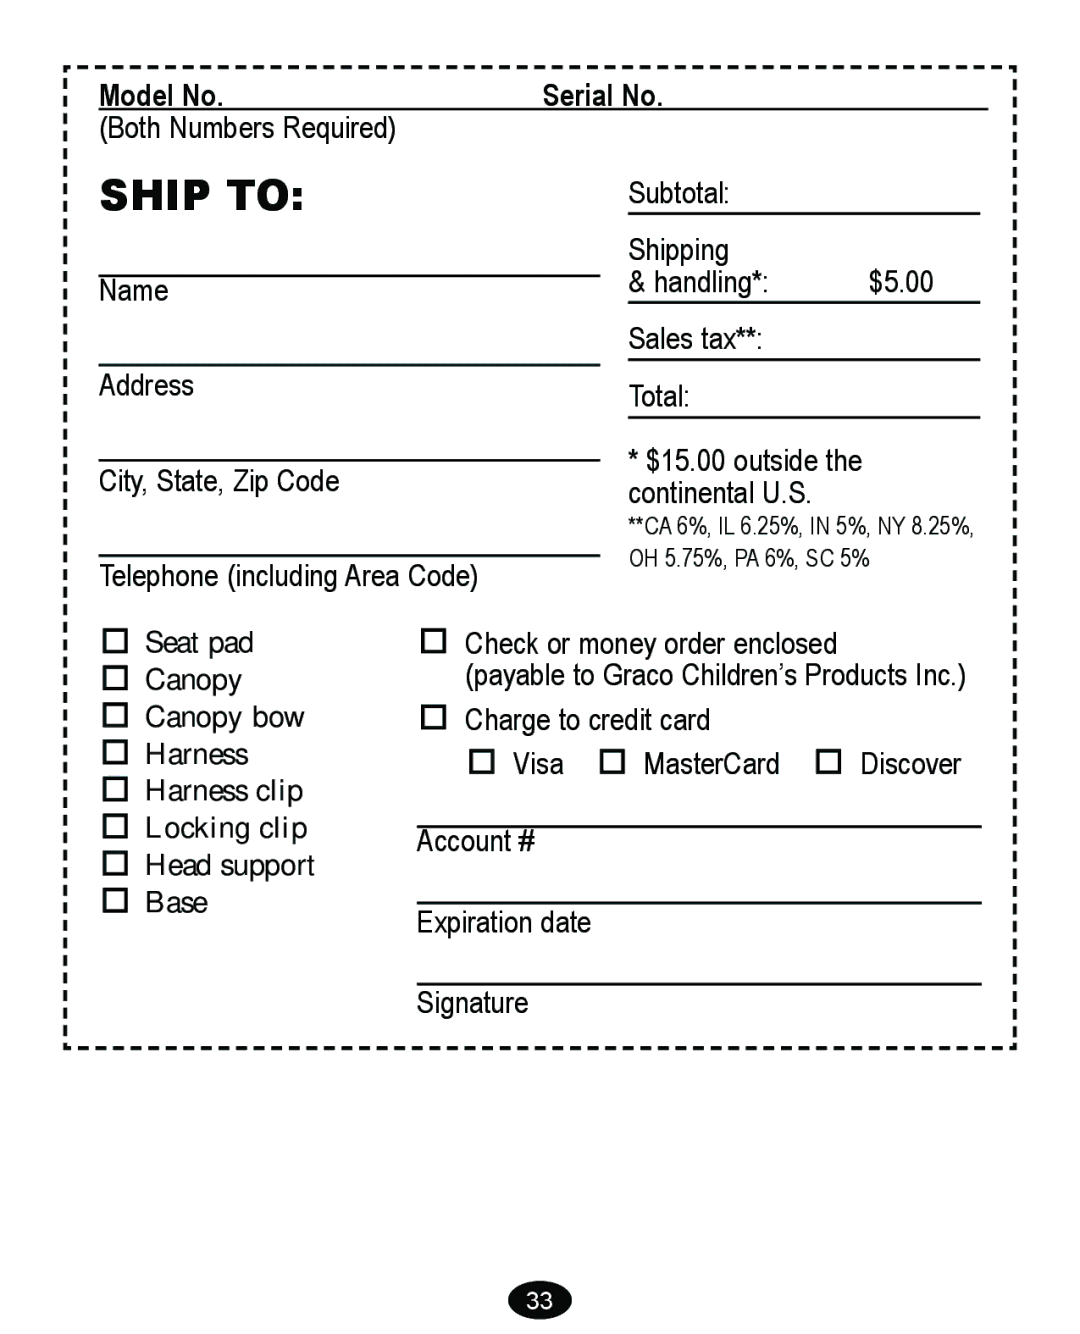 Graco 8474 owner manual Ship to 